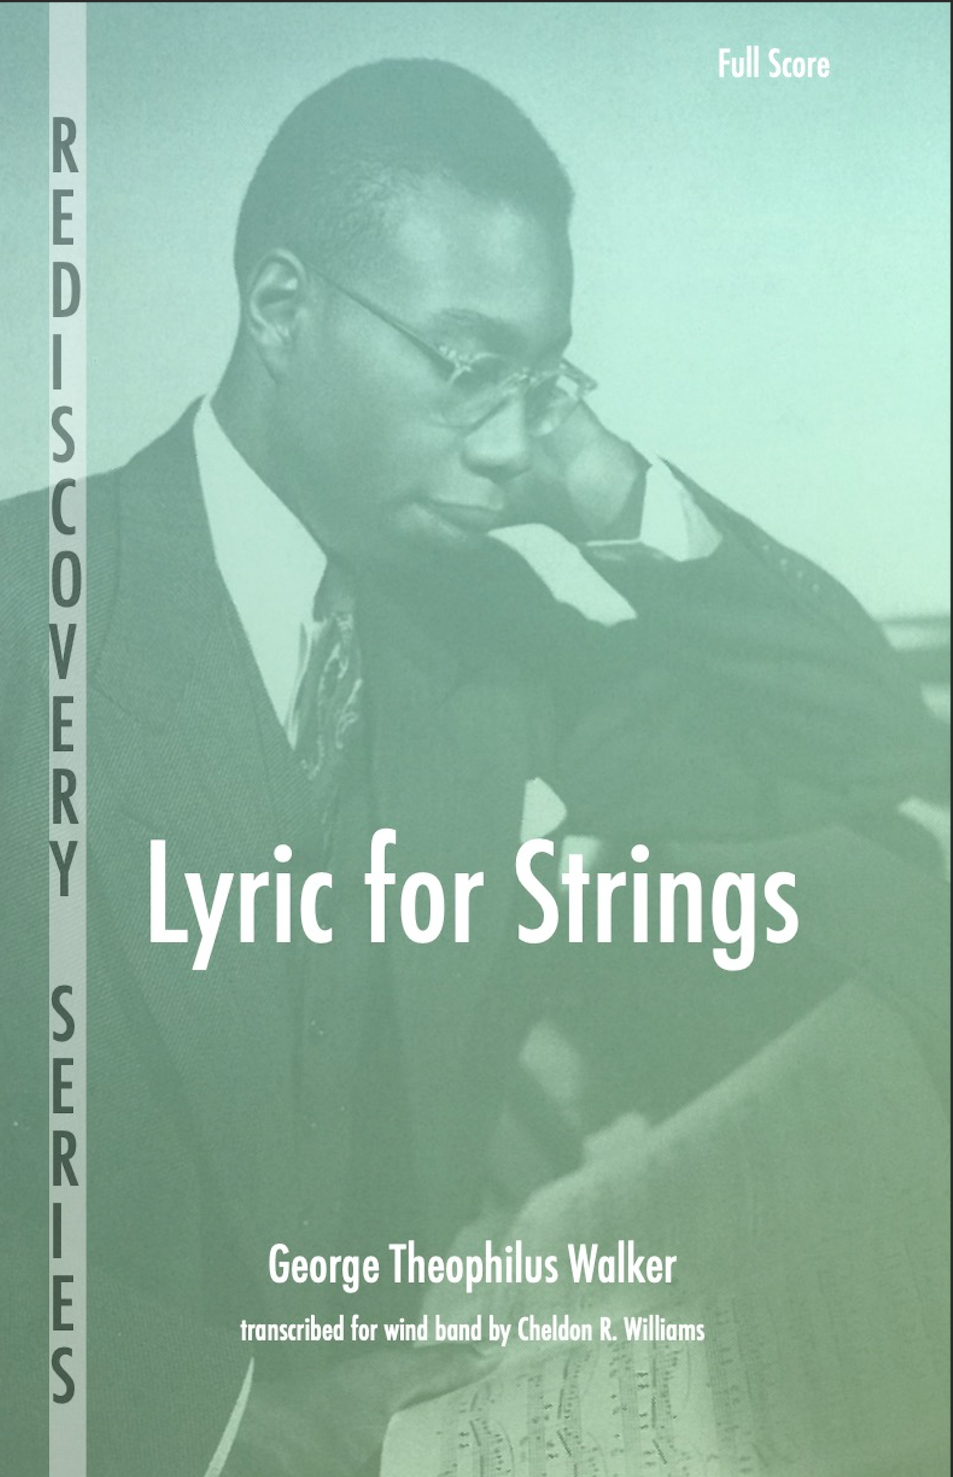 Lyric For Strings by George Theophilus Walker, trans. Cheldon Williams